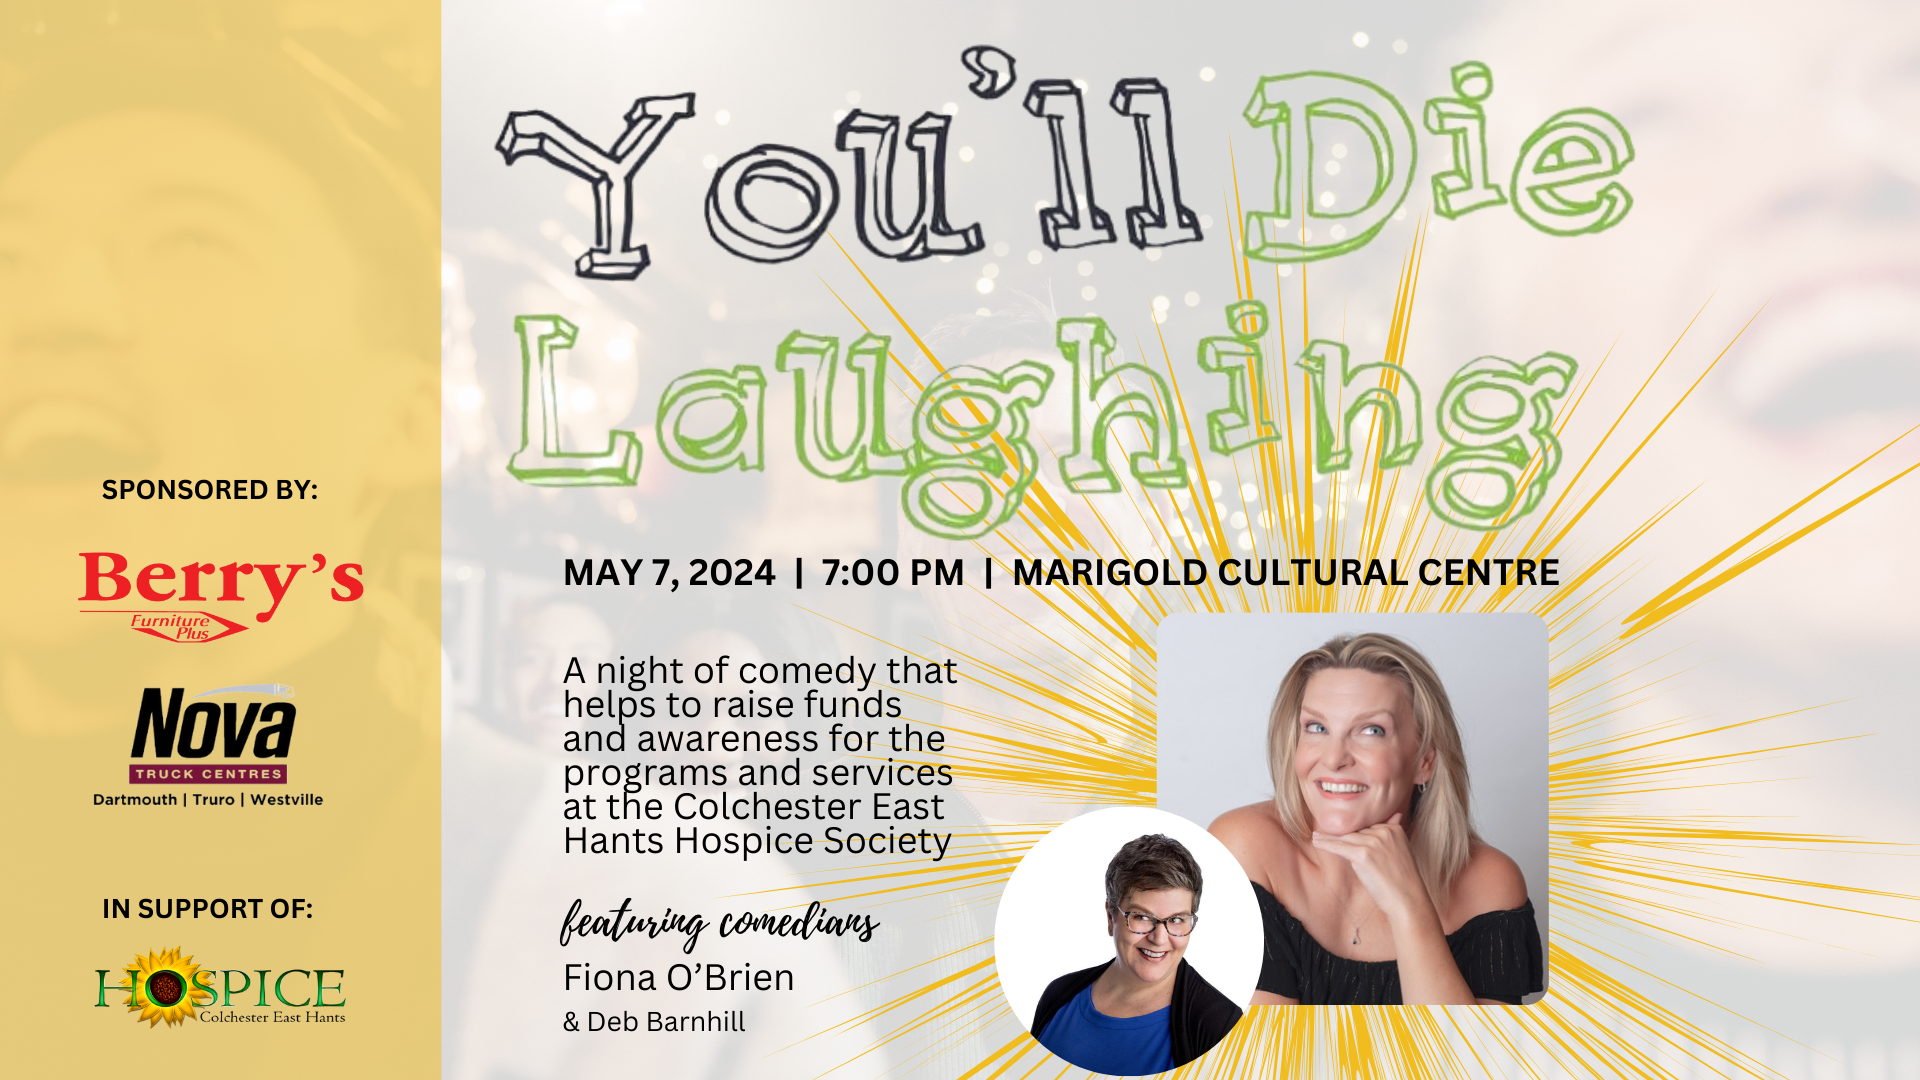   You’ll Die Laughing   May 7 